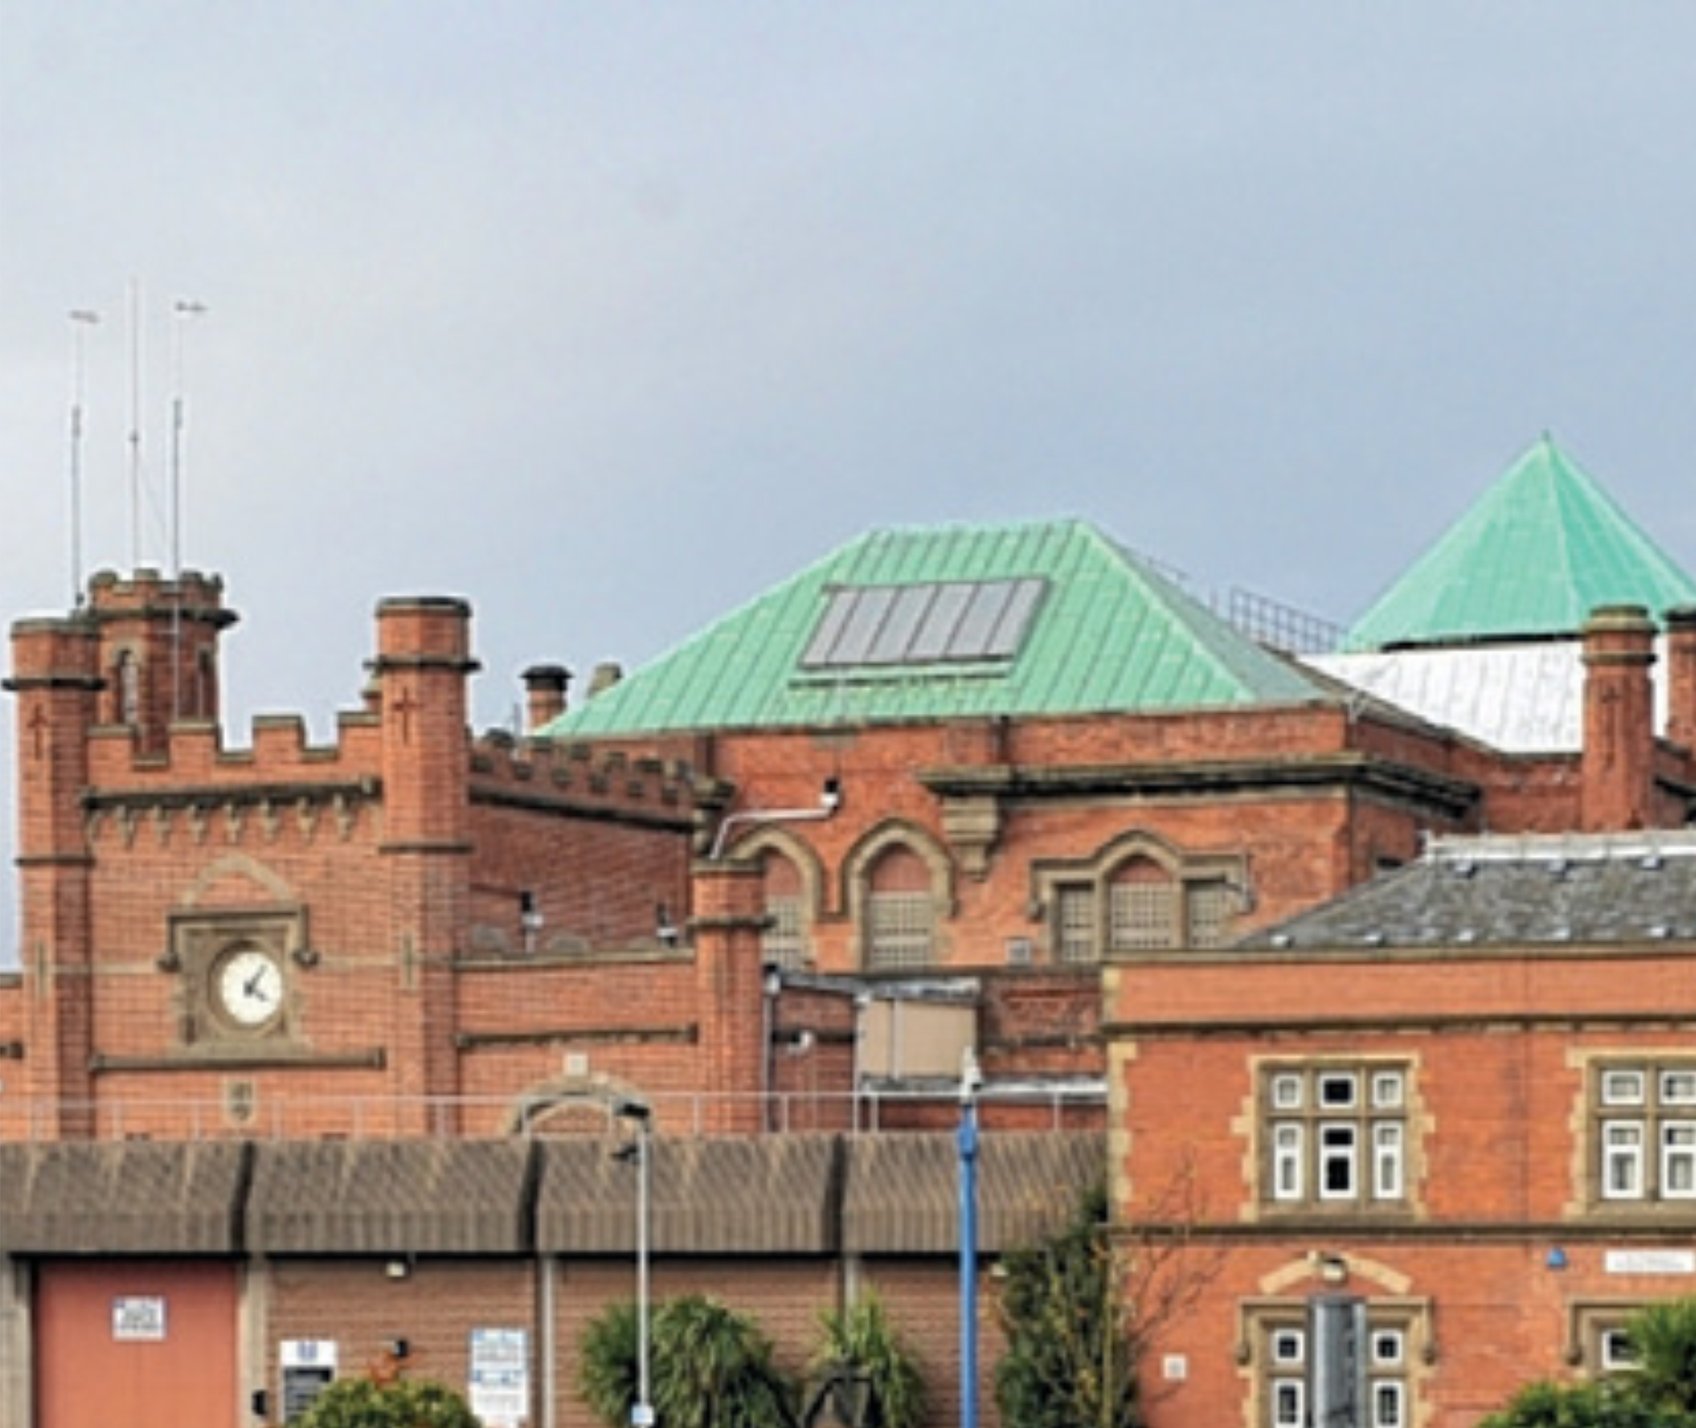 hull prison booking visits online